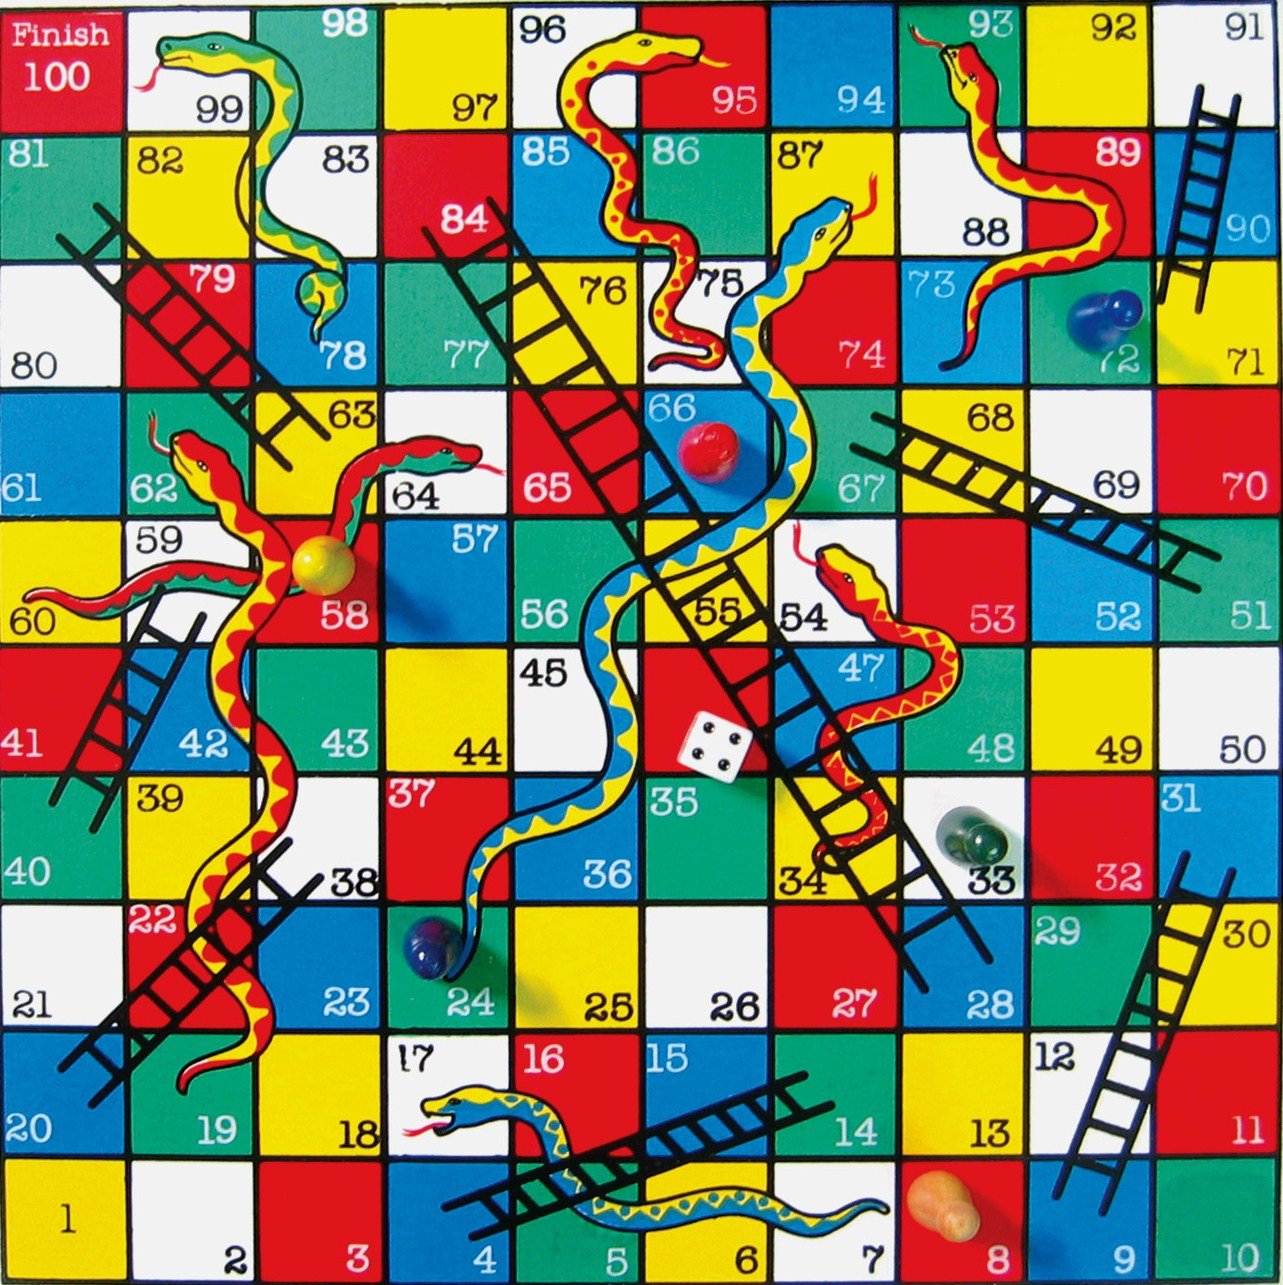 snakes-and-ladders-game-project-in-c-code-with-c